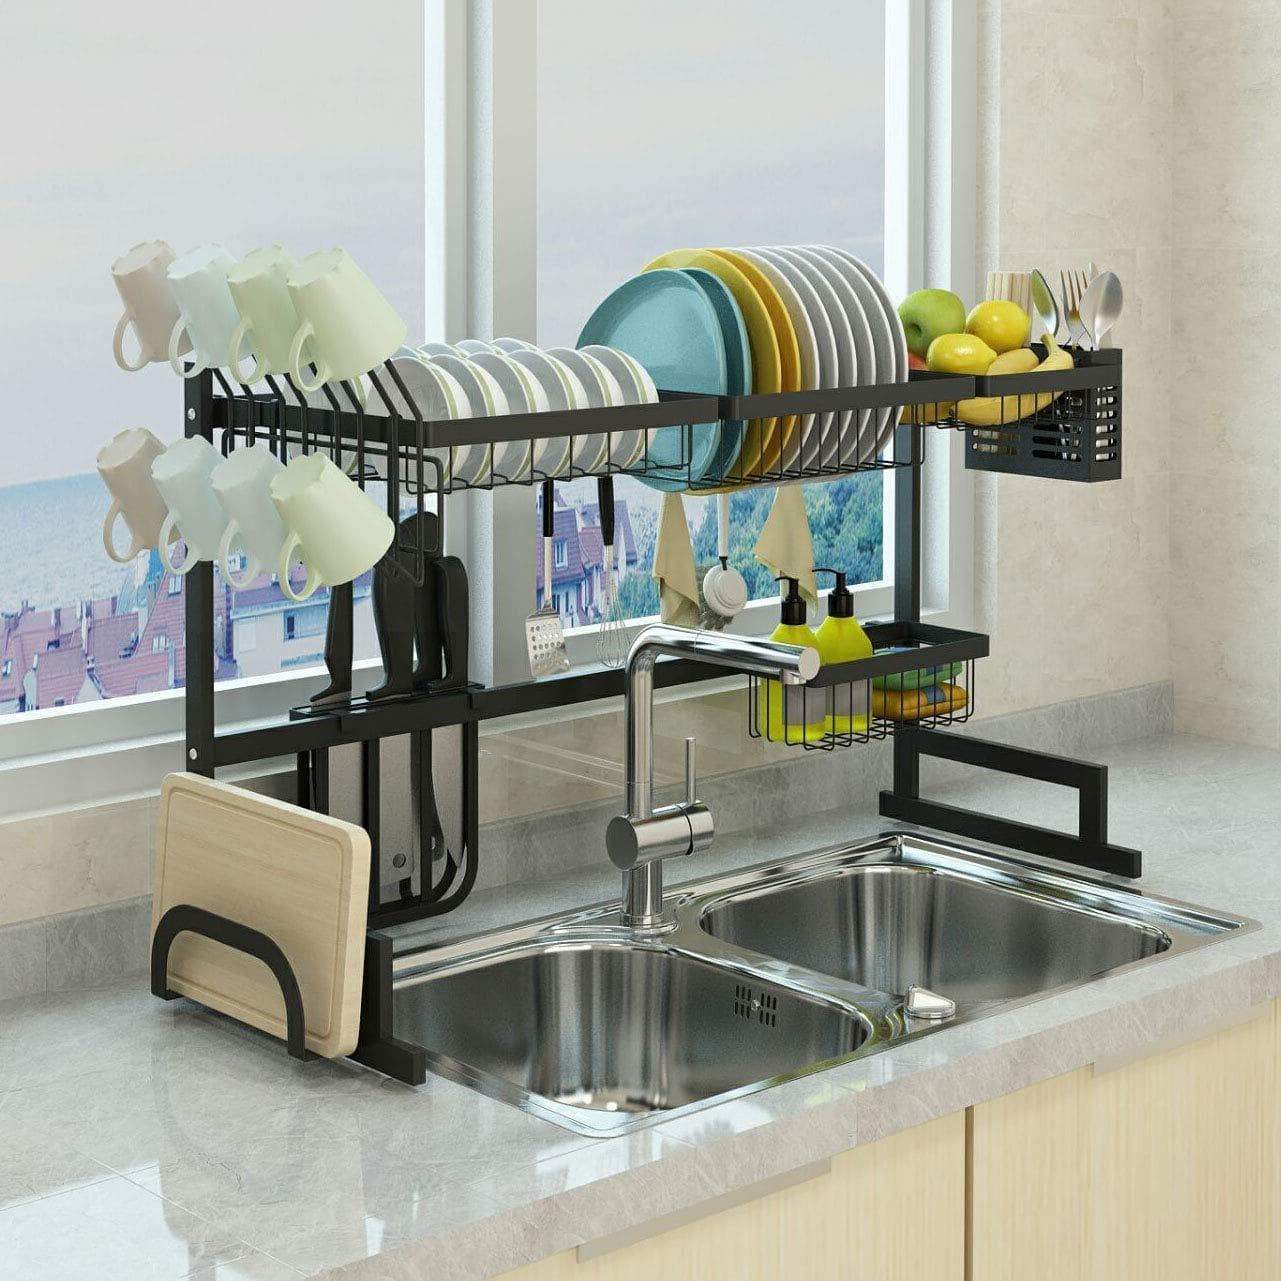 Dish Drying Rack Over Sink Display Stand Drainer Stainless Steel Kitchen Supplies Storage Shelf Utensils Holder Kitchen Supplies Storage Rack 85cm (Black)